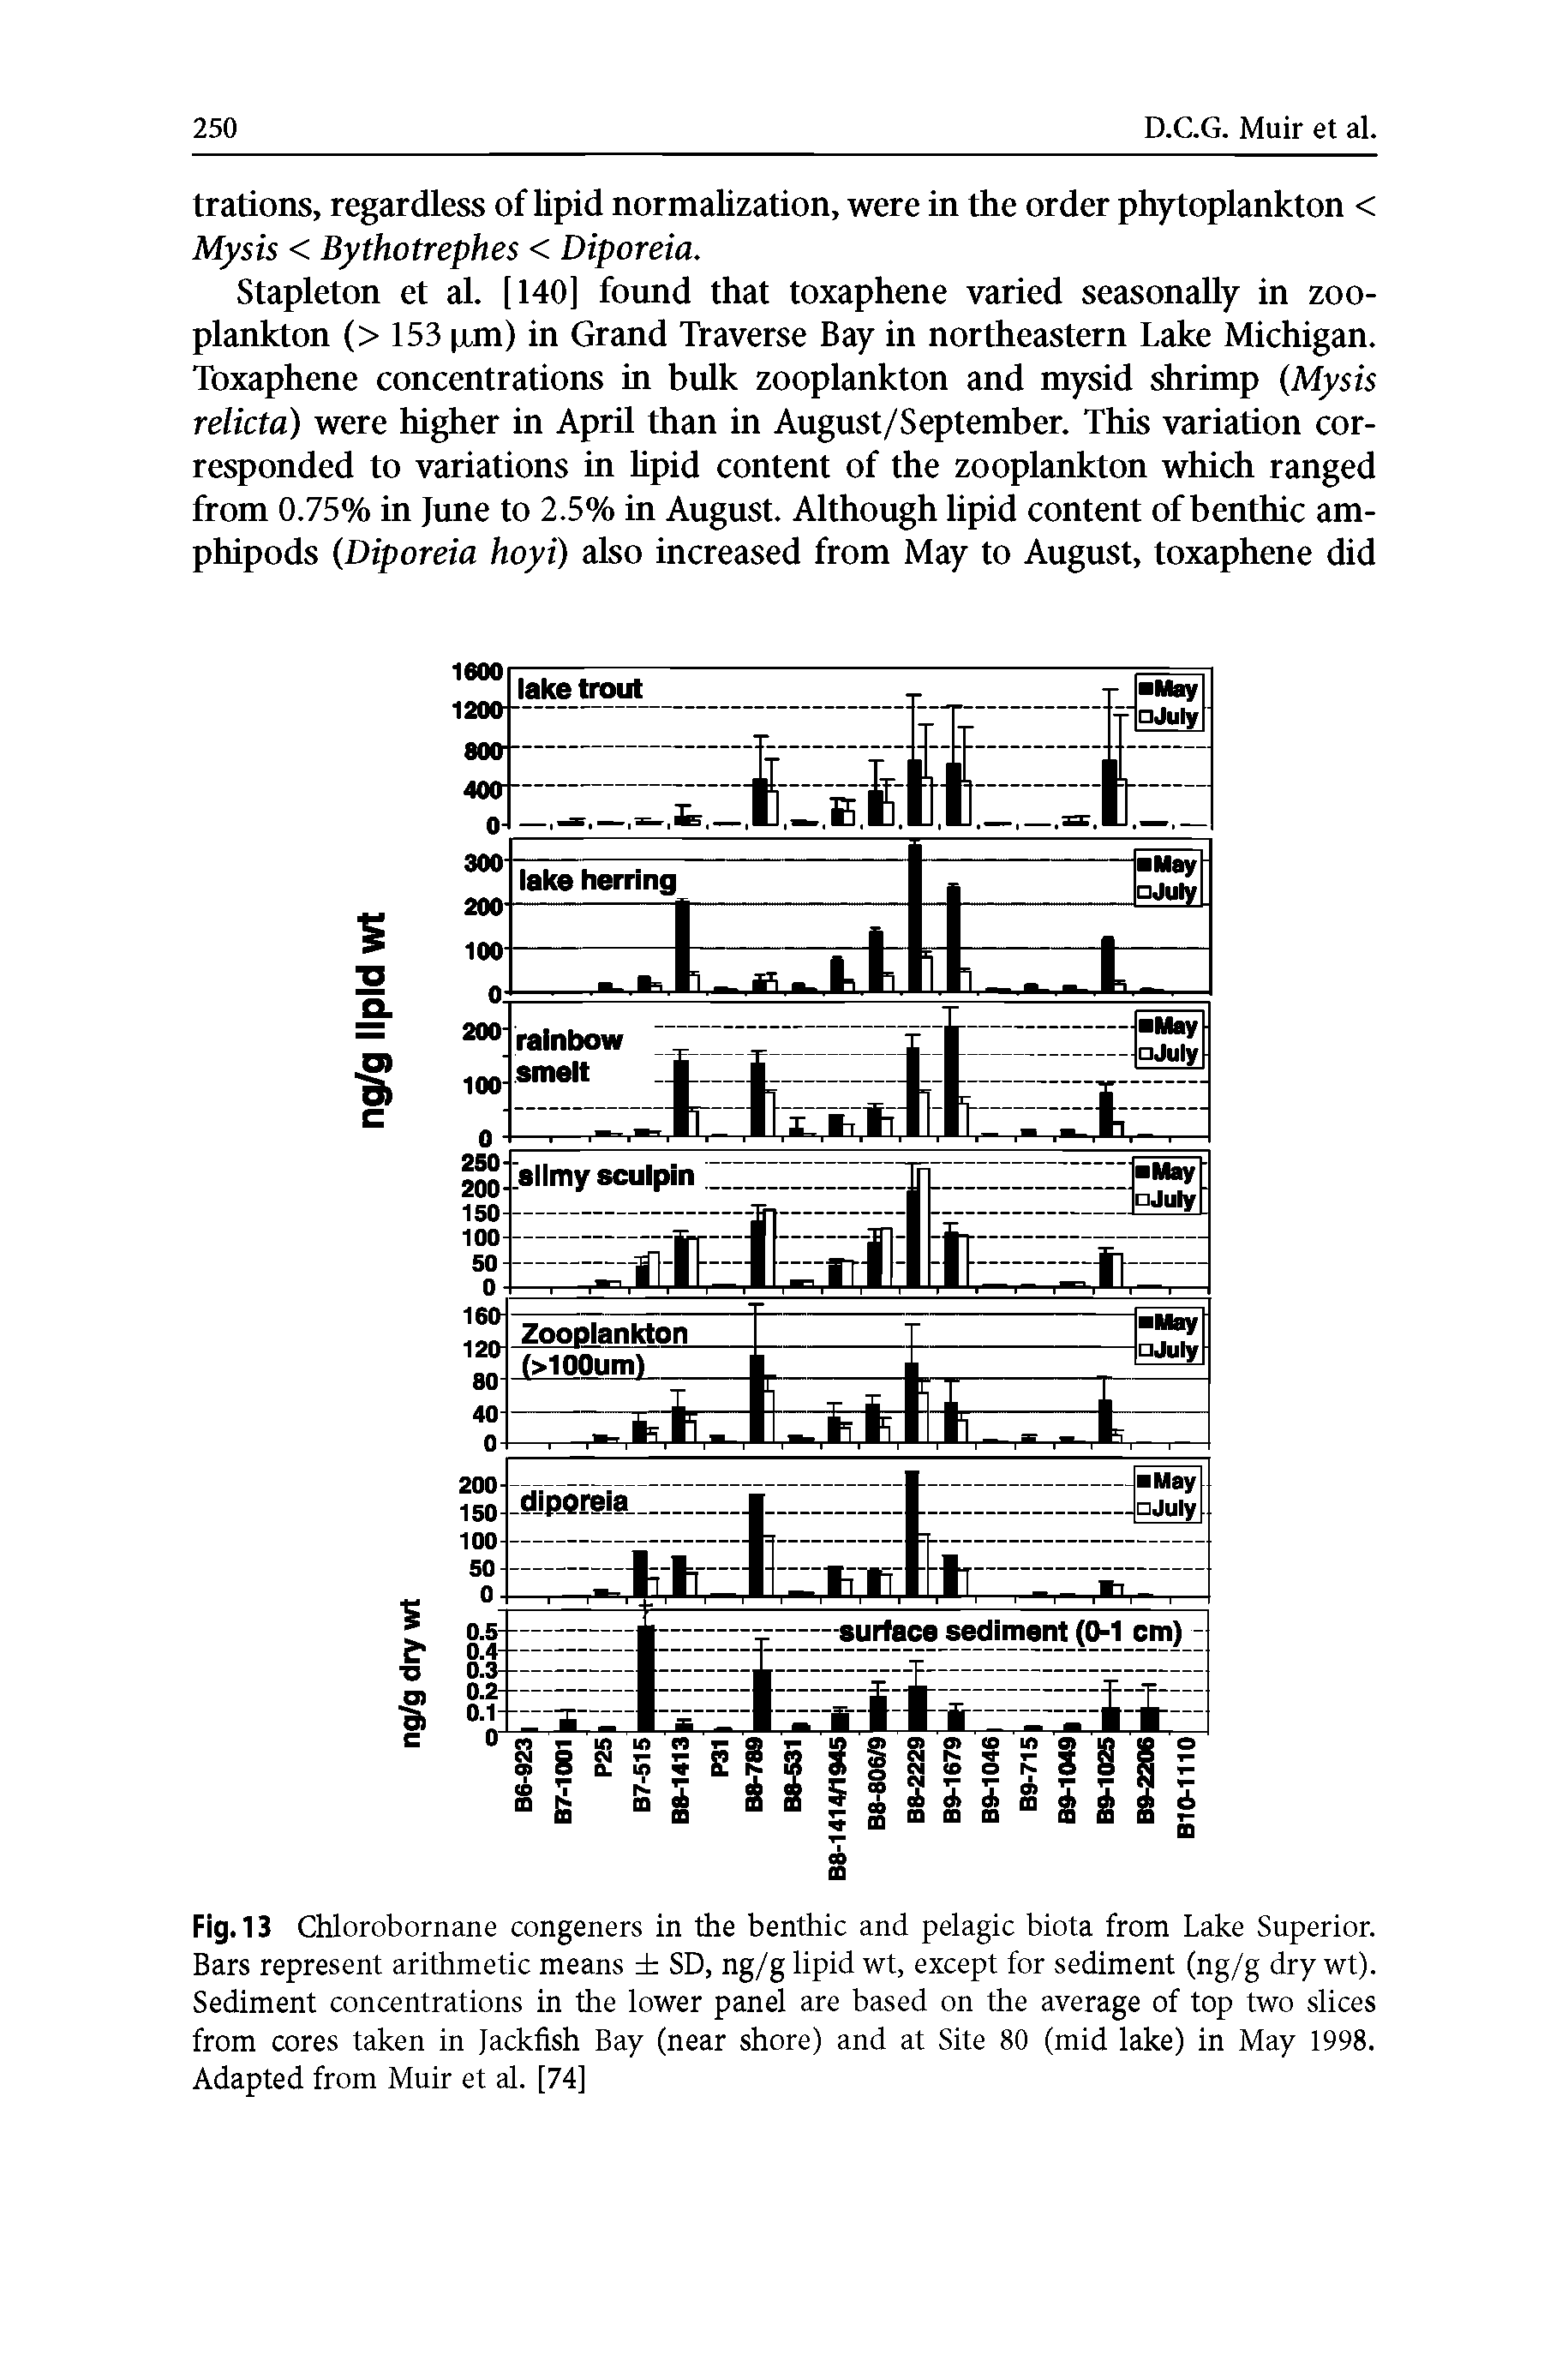 Fig. 13 Chlorobornane congeners in the benthic and pelagic biota from Lake Superior. Bars represent arithmetic means SD, ng/g lipid wt, except for sediment (ng/g dry wt). Sediment concentrations in the lower panel are based on the average of top two slices from cores taken in Jackfish Bay (near shore) and at Site 80 (mid lake) in May 1998. Adapted from Muir et al. [74]...